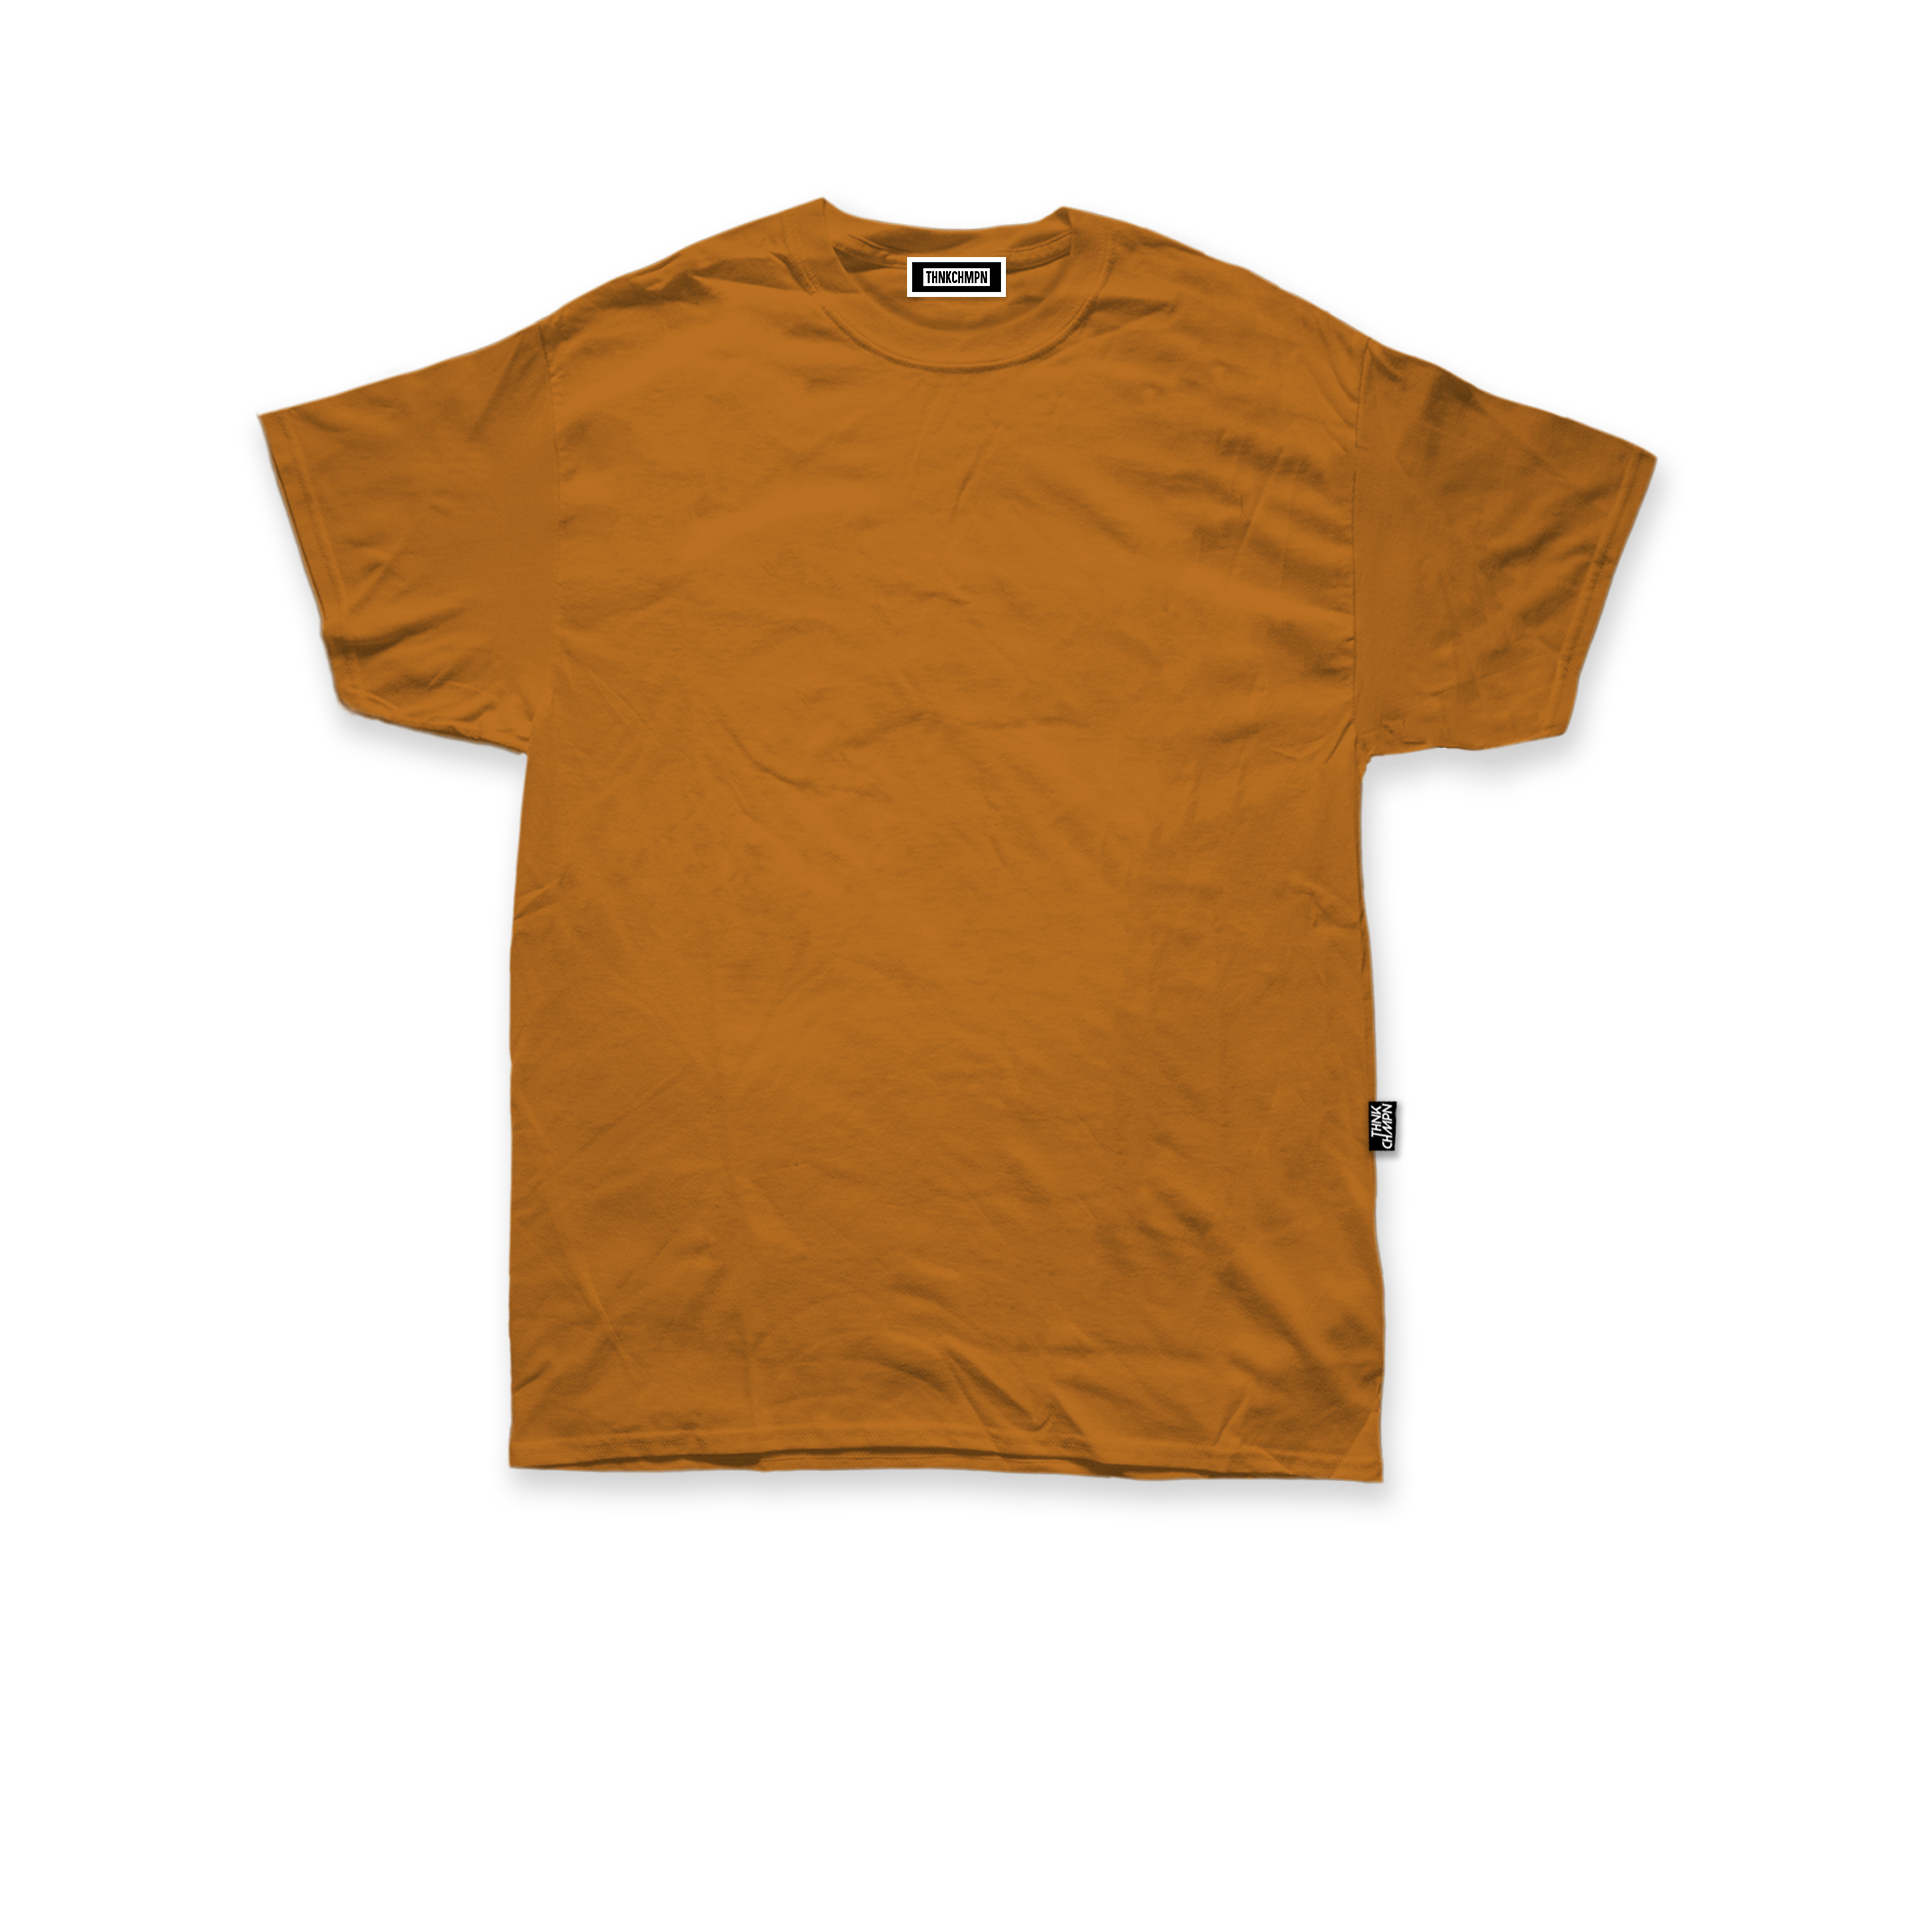 OVERSIZED TEE IN SAND MUSTARD – THNKCHMPN